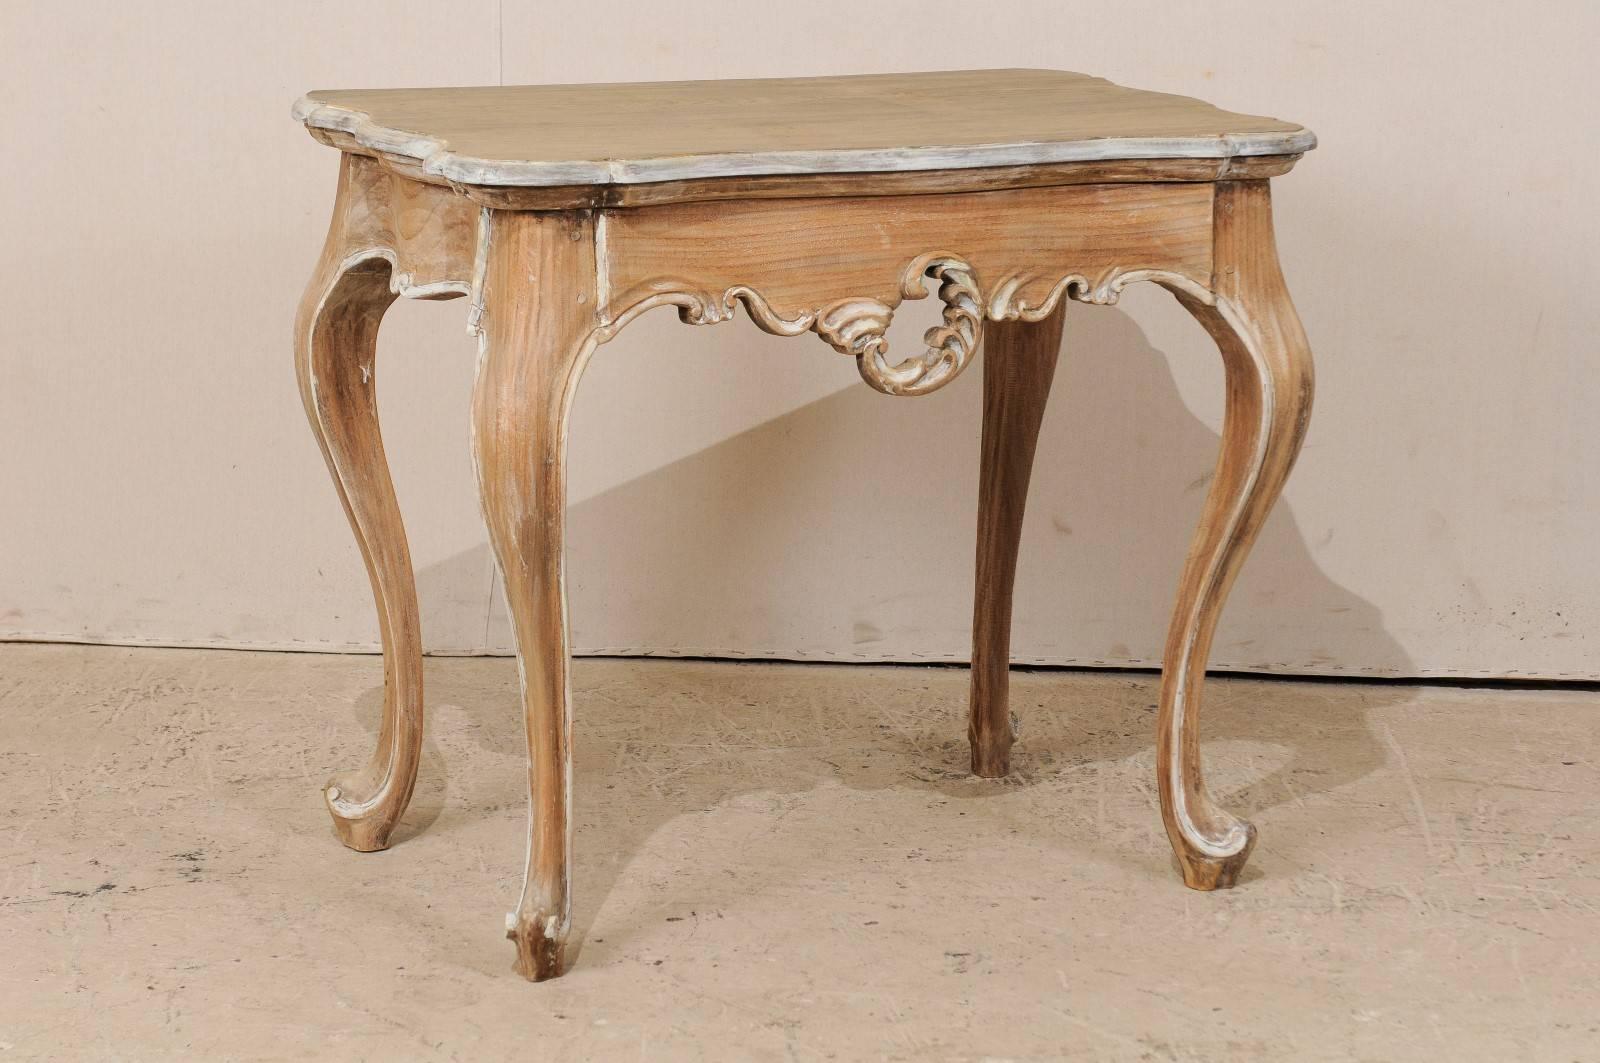 A Brazilian wood accent table. This Brazilian table from the 20th century, features a nicely carved and pierced apron, cabriole legs, and carved edging along top. The table has a natural wood finish with a lighter wash along the top and highlighted